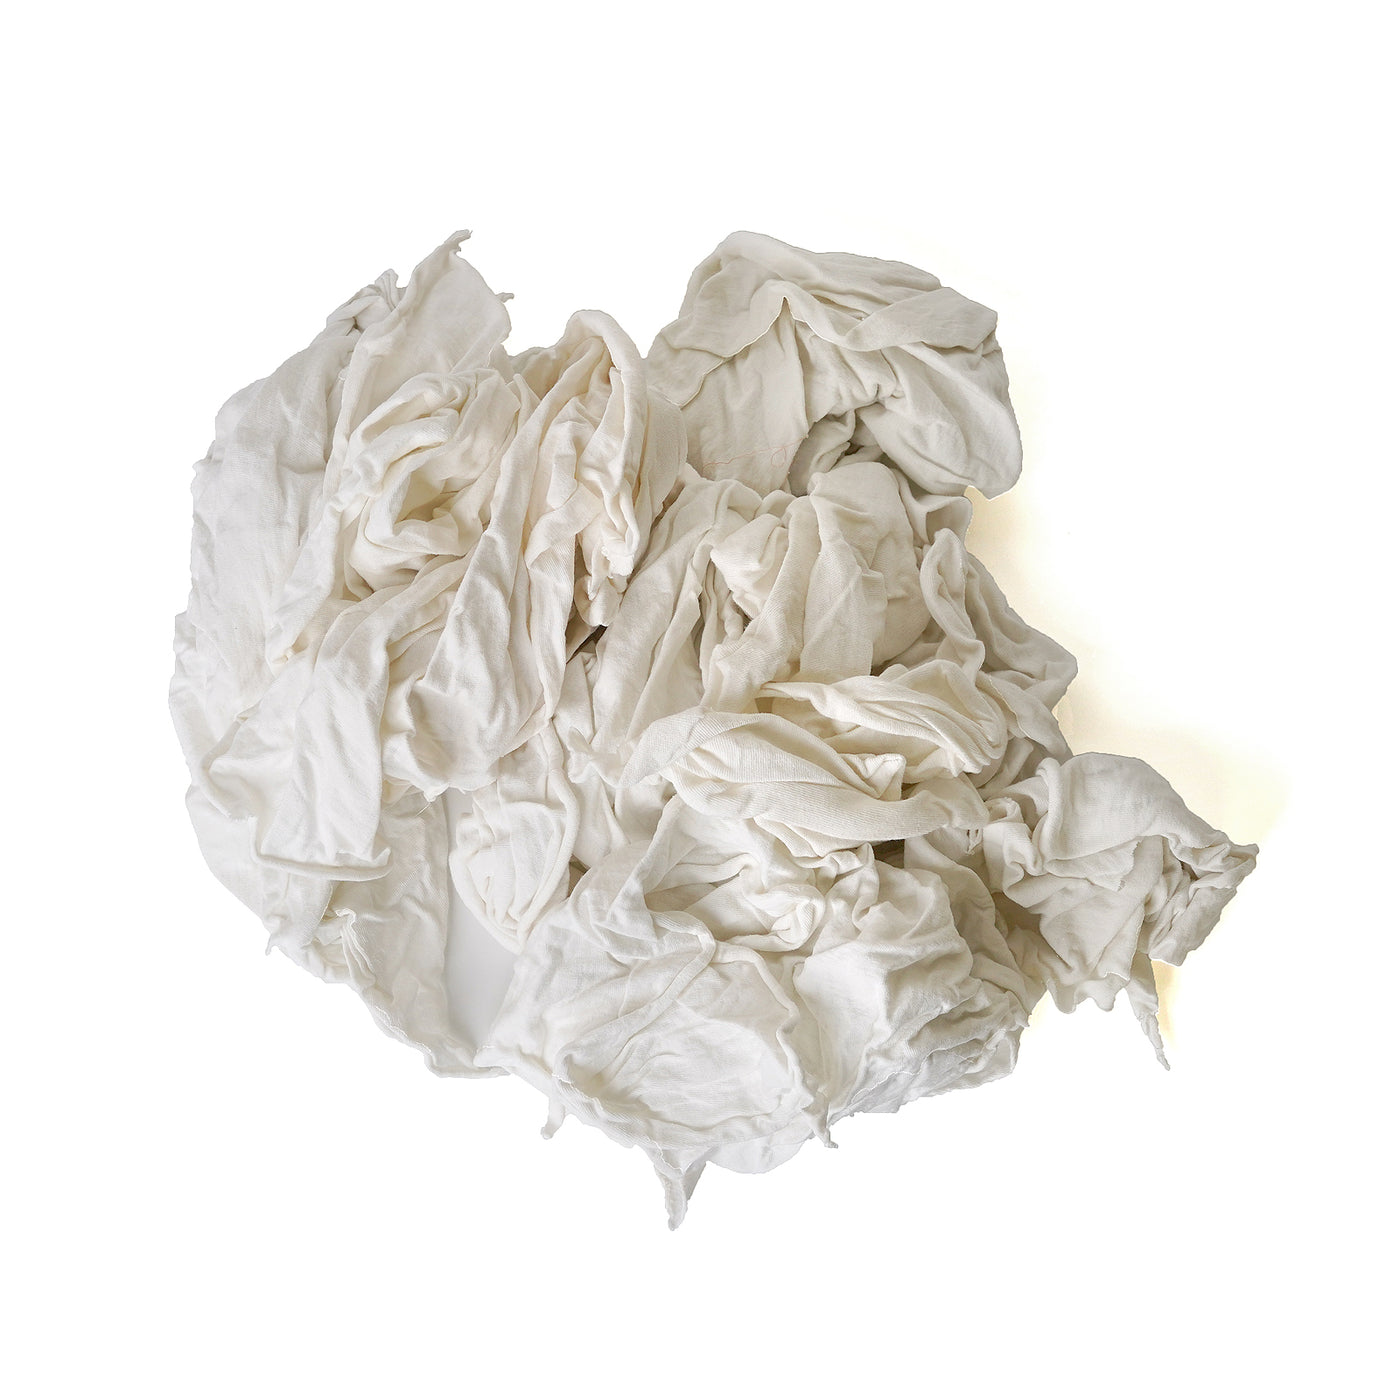 Cotton Cleaning Rags Bale (100% Recycled Cotton) – Sandbaggy